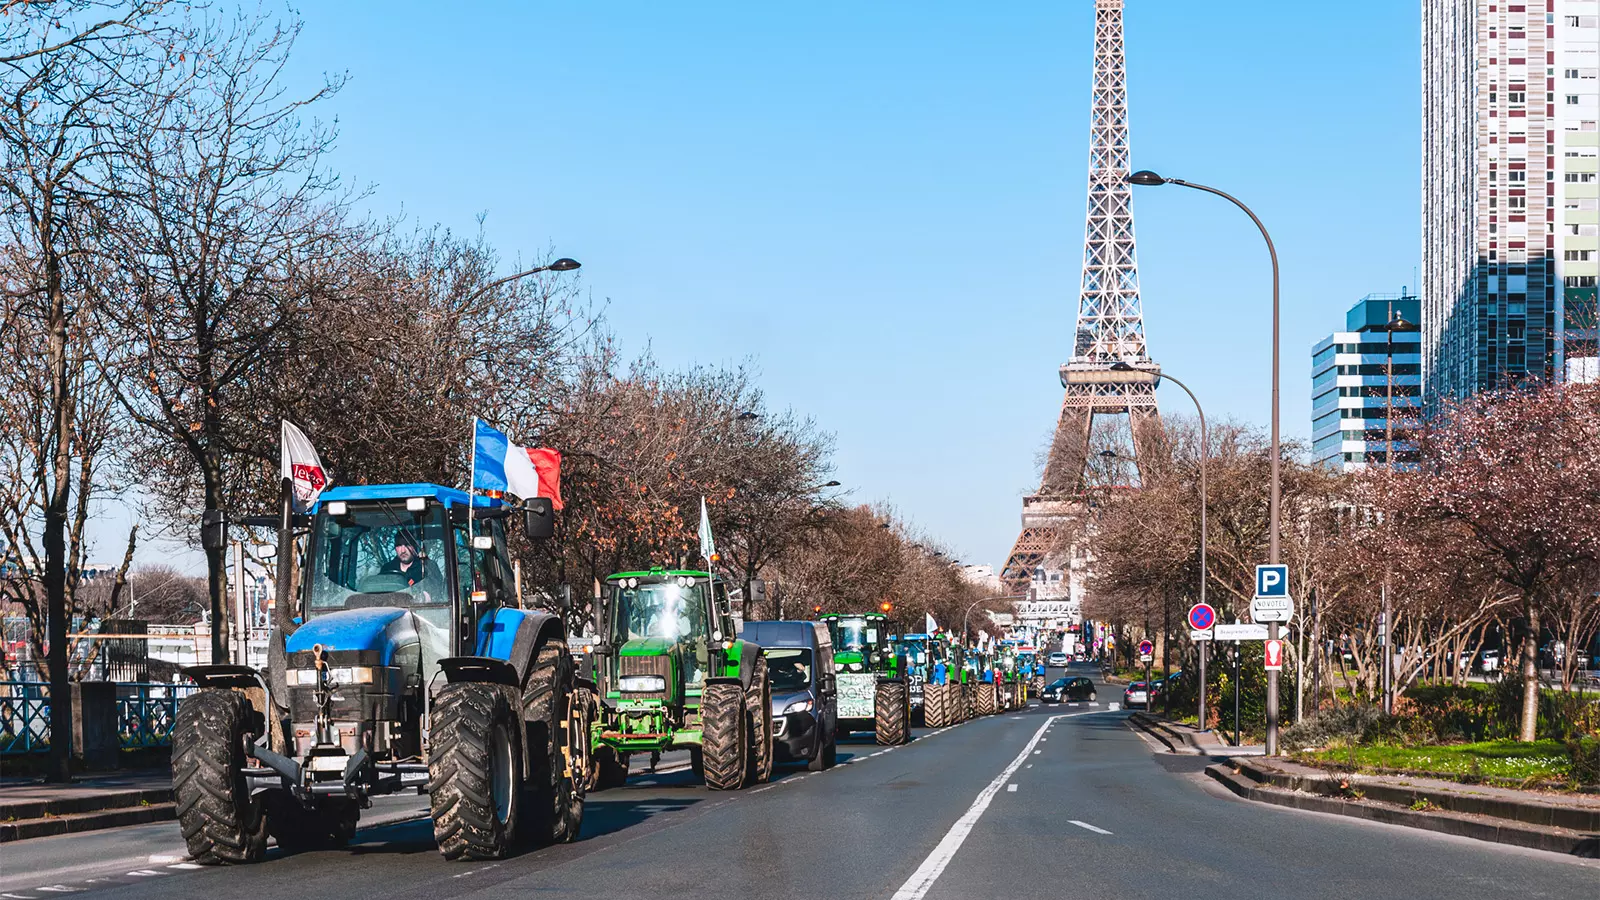 French farmers back in Paris with tractors for another protest